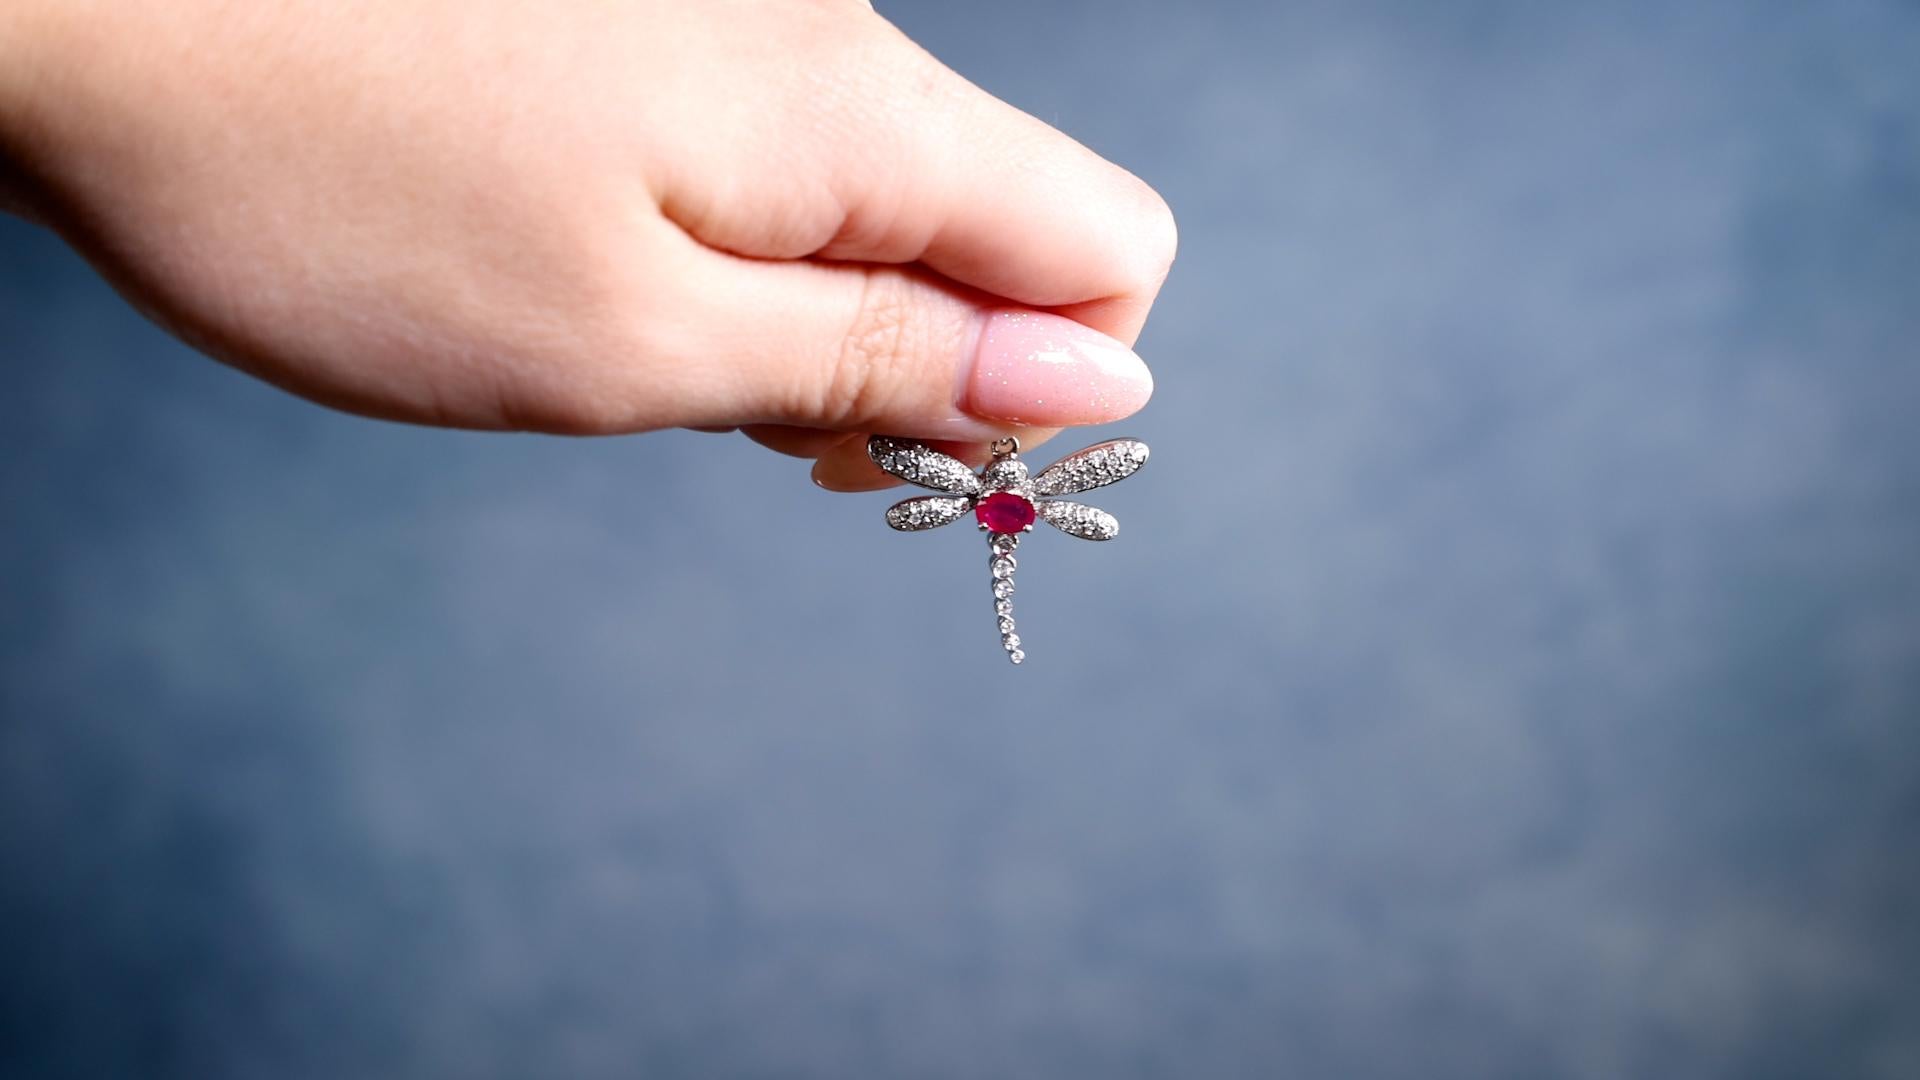 One Vintage French Ruby Diamond 18k White Gold Dragonfly Pendant. Featuring one oval cut ruby weighing approximately 0.40 carat. Accented by 57 round brilliant cut diamonds with a total weight of approximately 0.35 carat, graded H-I color, SI-I